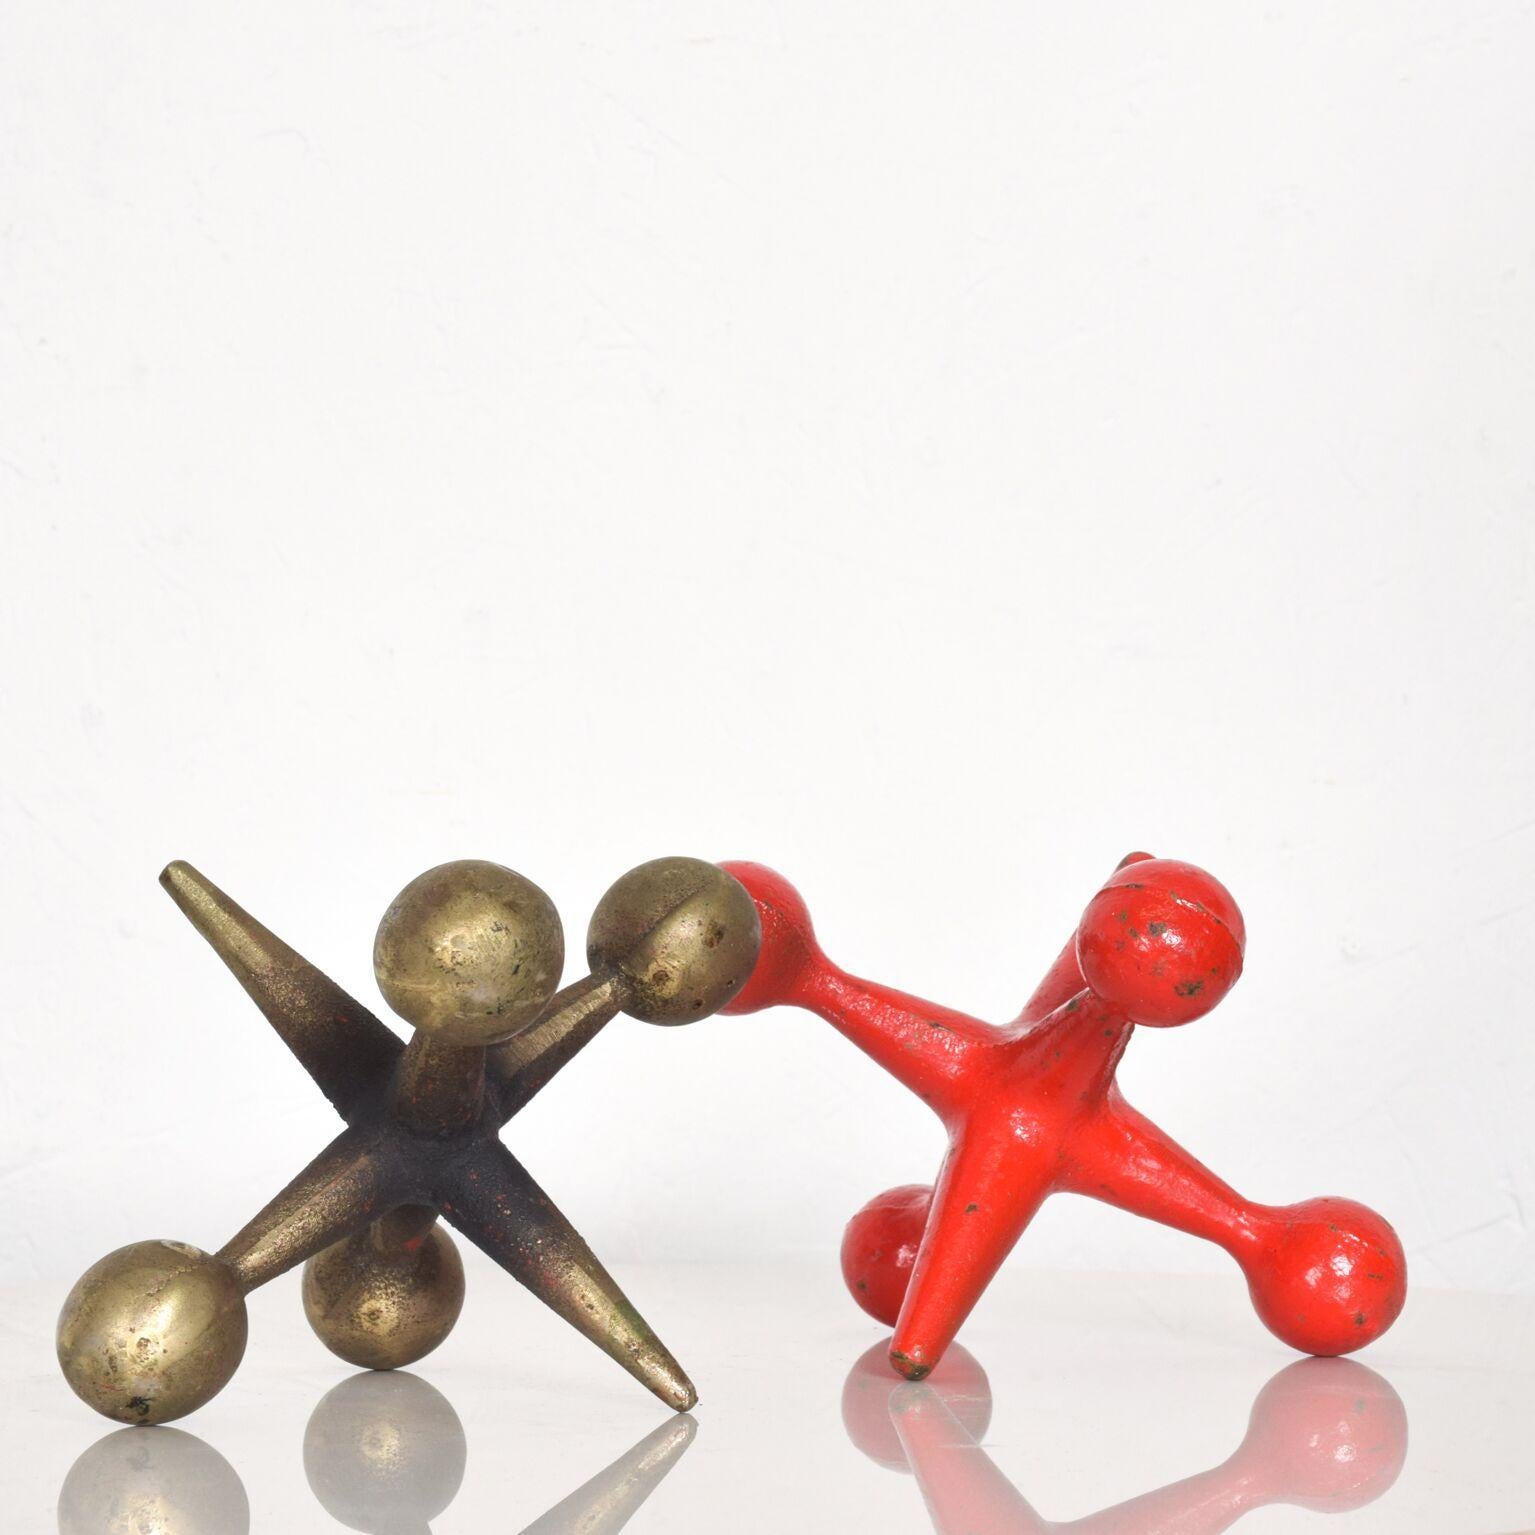 Mid-20th Century Pair of Jacks Bookends Mid-Century Modern Pop Art Style George Nelson, 1960s